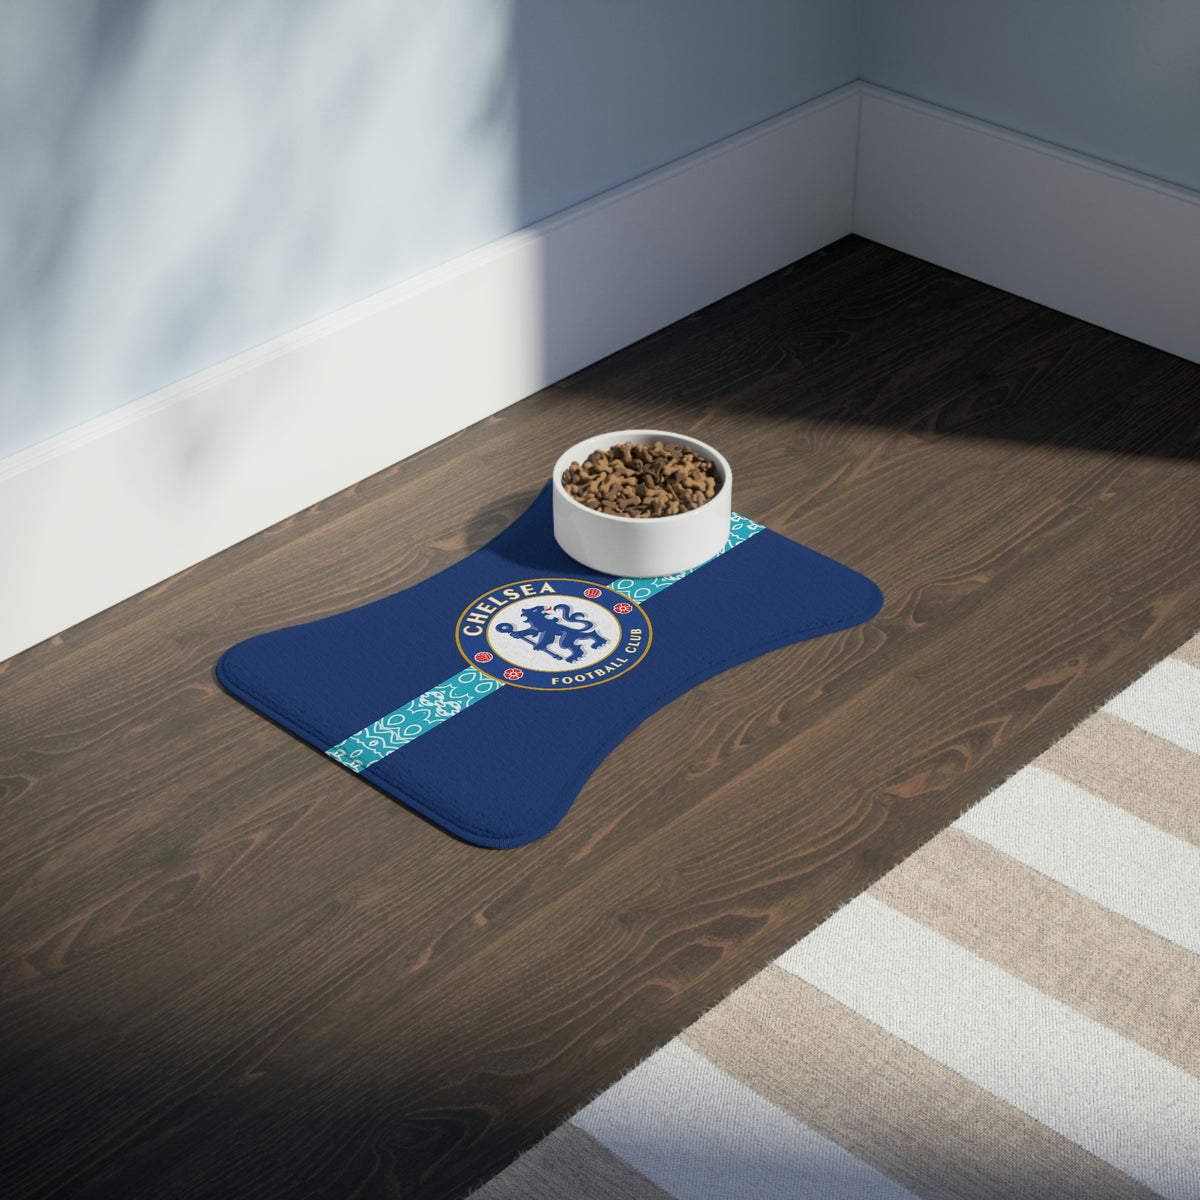 Chelsea FC 23 Home Inspired Feeding Mats - 3 Red Rovers